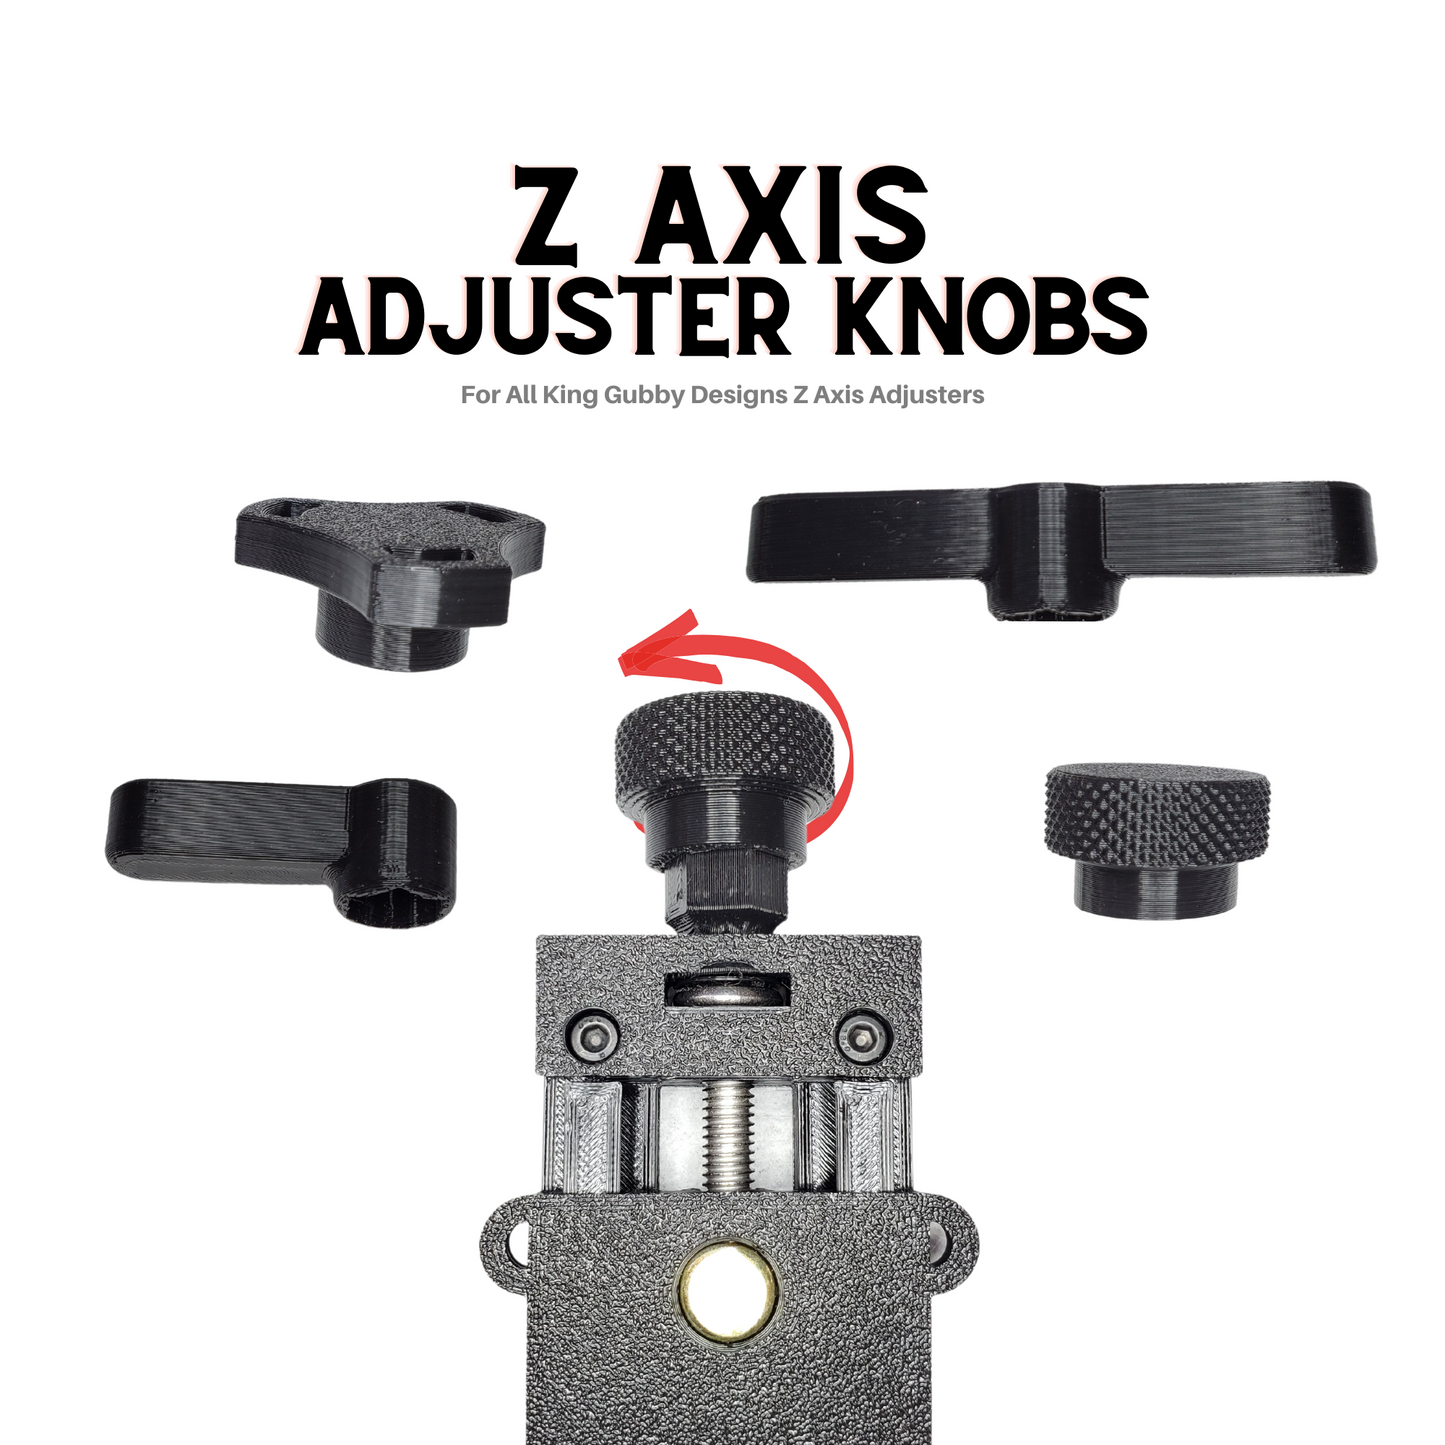 Longer Ray 5 Z Axis Adjuster